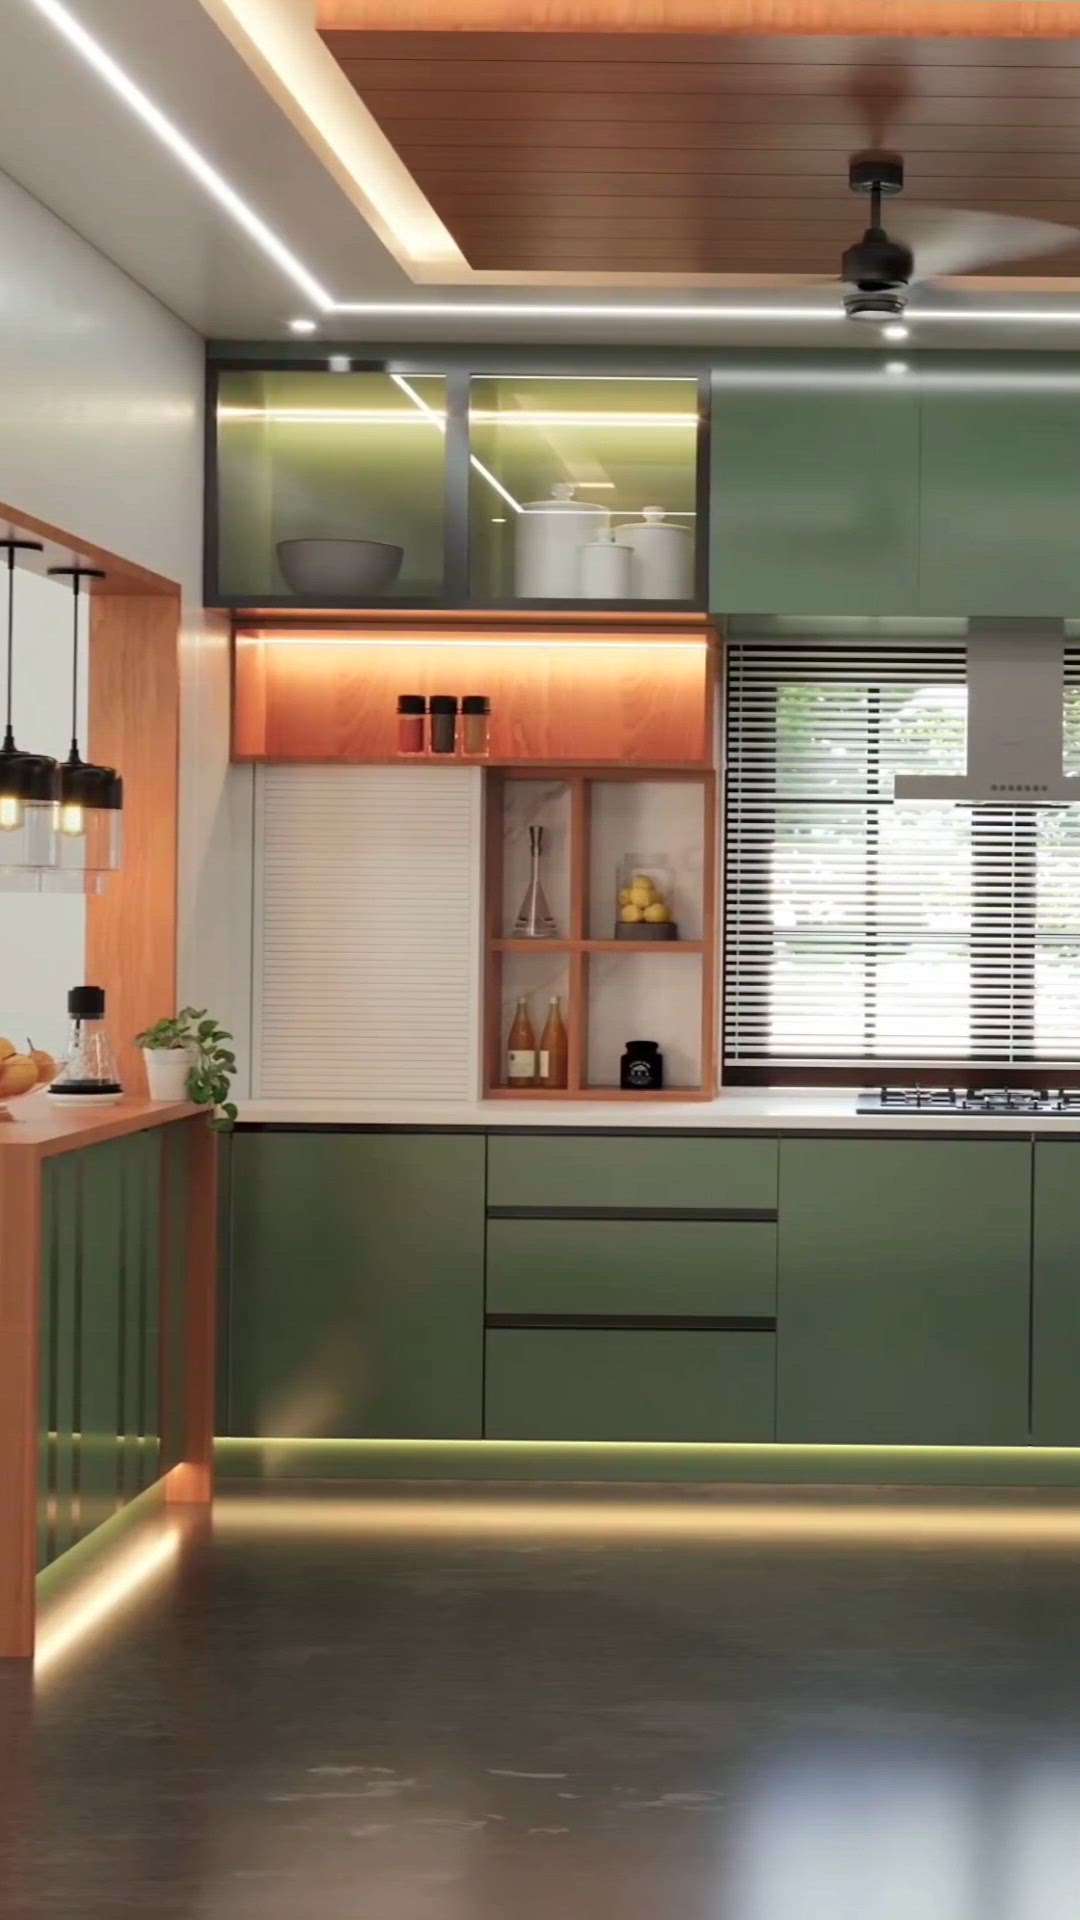 new kitchen design
For house interiors contact

BELLA INTERIOR DECOR 
.
.
Make Your Dream House Come True With @bella_interiordecor 
.
.
• Your Budget ~ Their Brain 
• Themed Based Work
• BedRooms, Living Rooms, Study, Kitchen, Offices, Showrooms & More! 
.
.

.
Address :- jangirwala square Indore m.p. 

Credits: bella_interiordecor 

#interiordesign #design #interior #homedecor
#architecture #home #decor #interiors
#homedesign #interiordesigner #furniture
 #designer #interiorstyling
#interiordecor #homesweethome 
#furnituredesign #livingroom #interiordecorating  #instagood #instagram
#kitchendesign #foryou #photographylover #explorepage✨ #explorepage #viralpost #trending #trends #reelsinstagram #exploremore   #kolopost   #koloapp  #koloviral  #koloindore  #InteriorDesigner  #indorehouse   #LUXURY_INTERIOR   #luxurysofa   #luxurylivingroom  #koloapppurchase